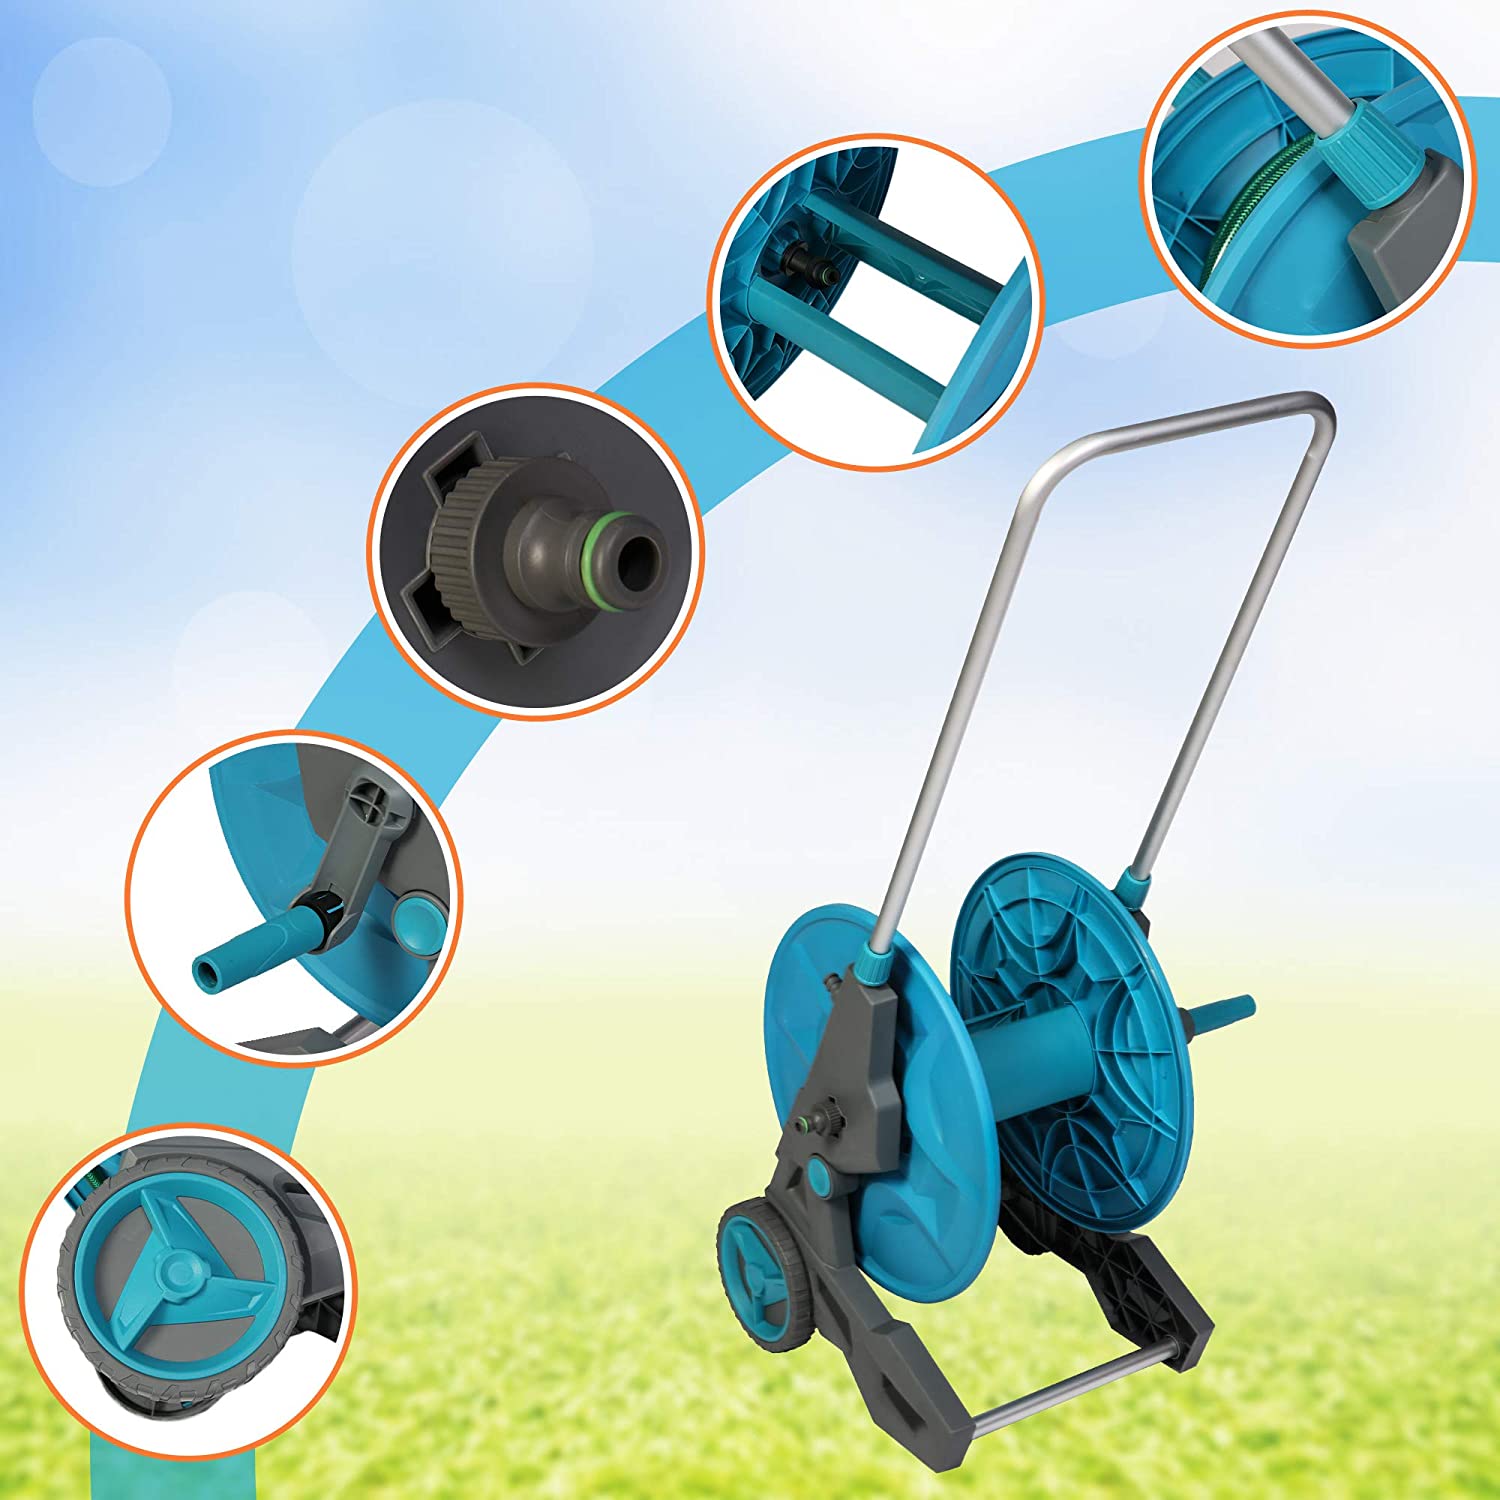 130 Feet Garden Hose Reel Aluminum Hose Reel Cart with Wheels 3/4 Inch 6.6 Feet Leader Hose 7 Patterns Nozzle Included